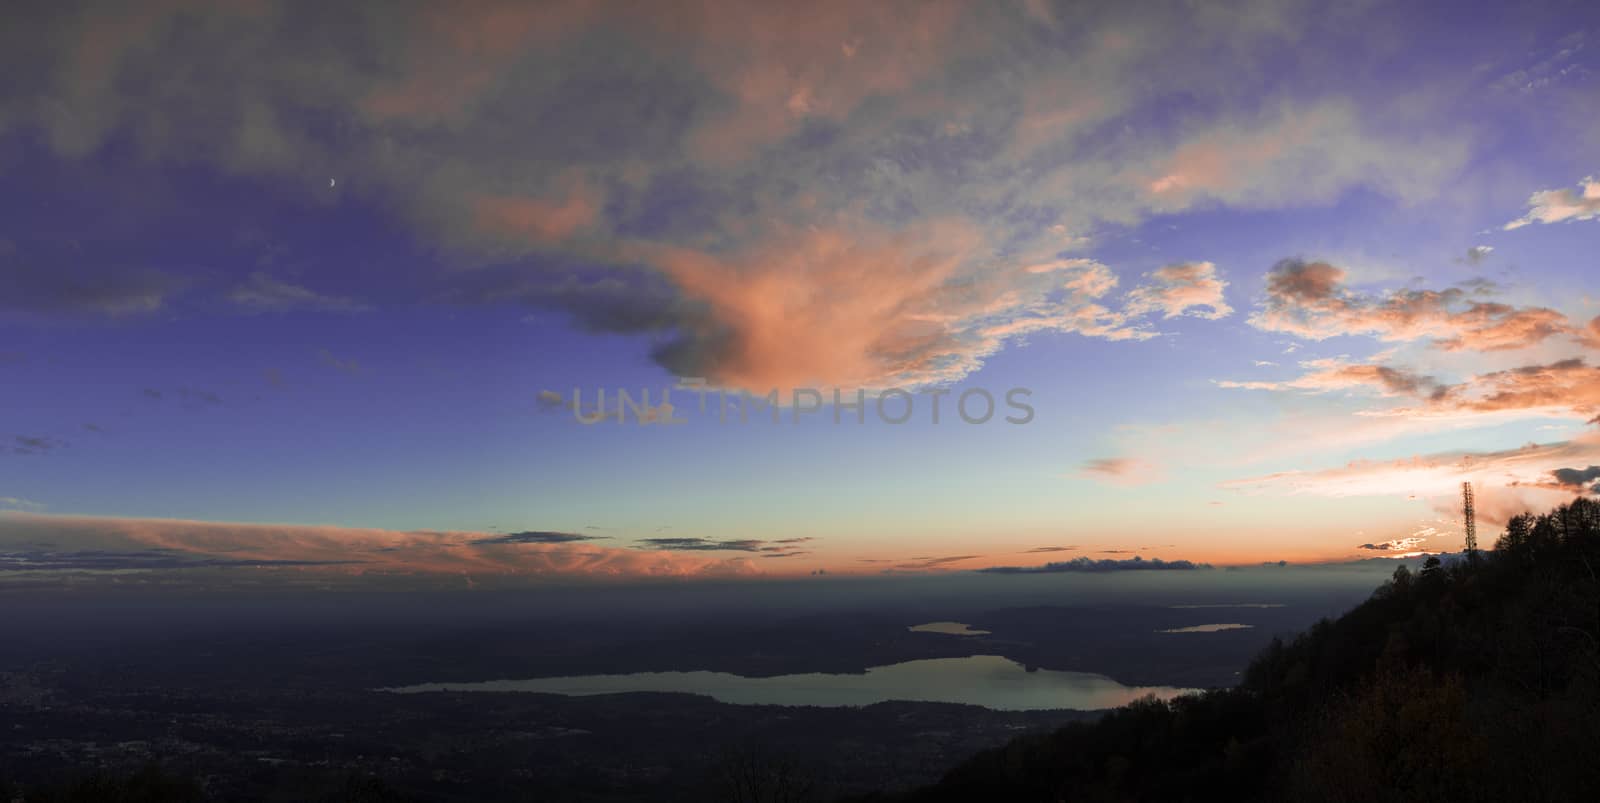 Colorful sunset on the Varese lake in a autumn afternoon vier from regional park of Campo dei Fiori Varese - Lombardy, Italy